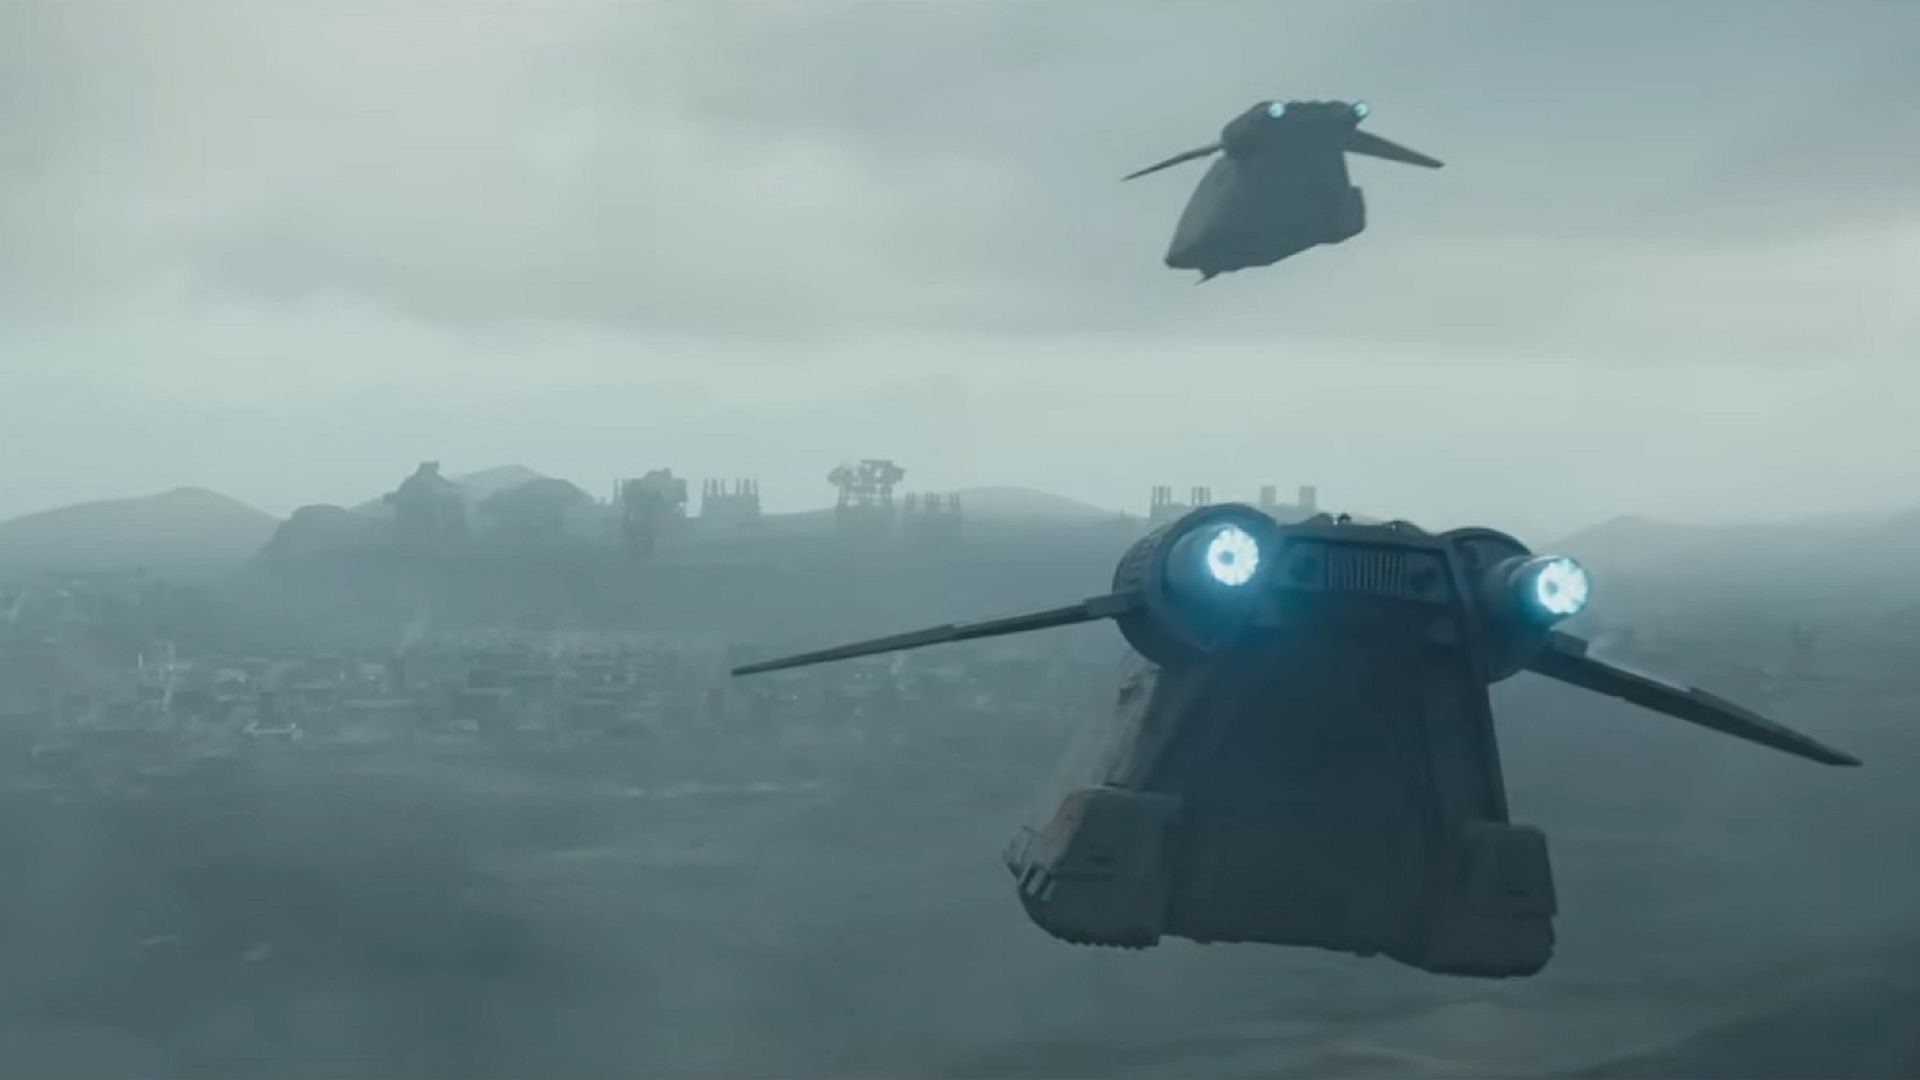 Star Wars reveals trailer and release date for Andor TV show